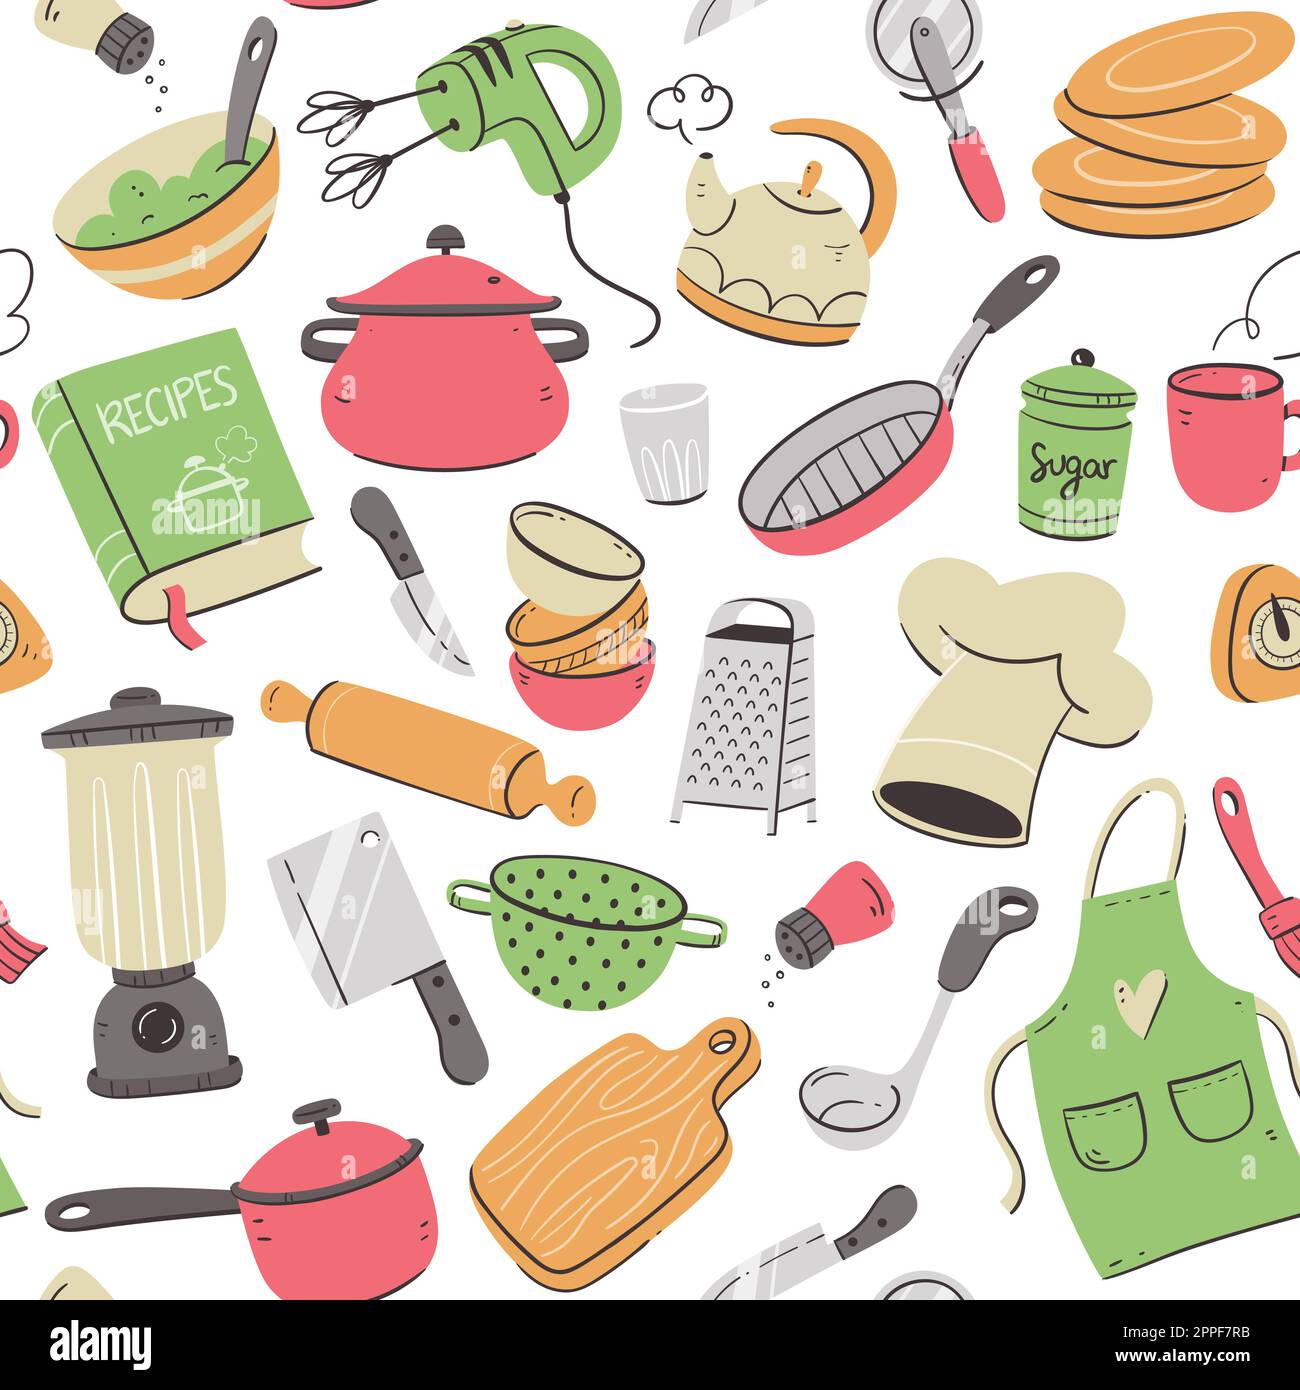 Kitchen tools and appliances seamless pattern. Cute illustration with isolated cooking objects in vector format. Kitchen utensils background. Stock Vector